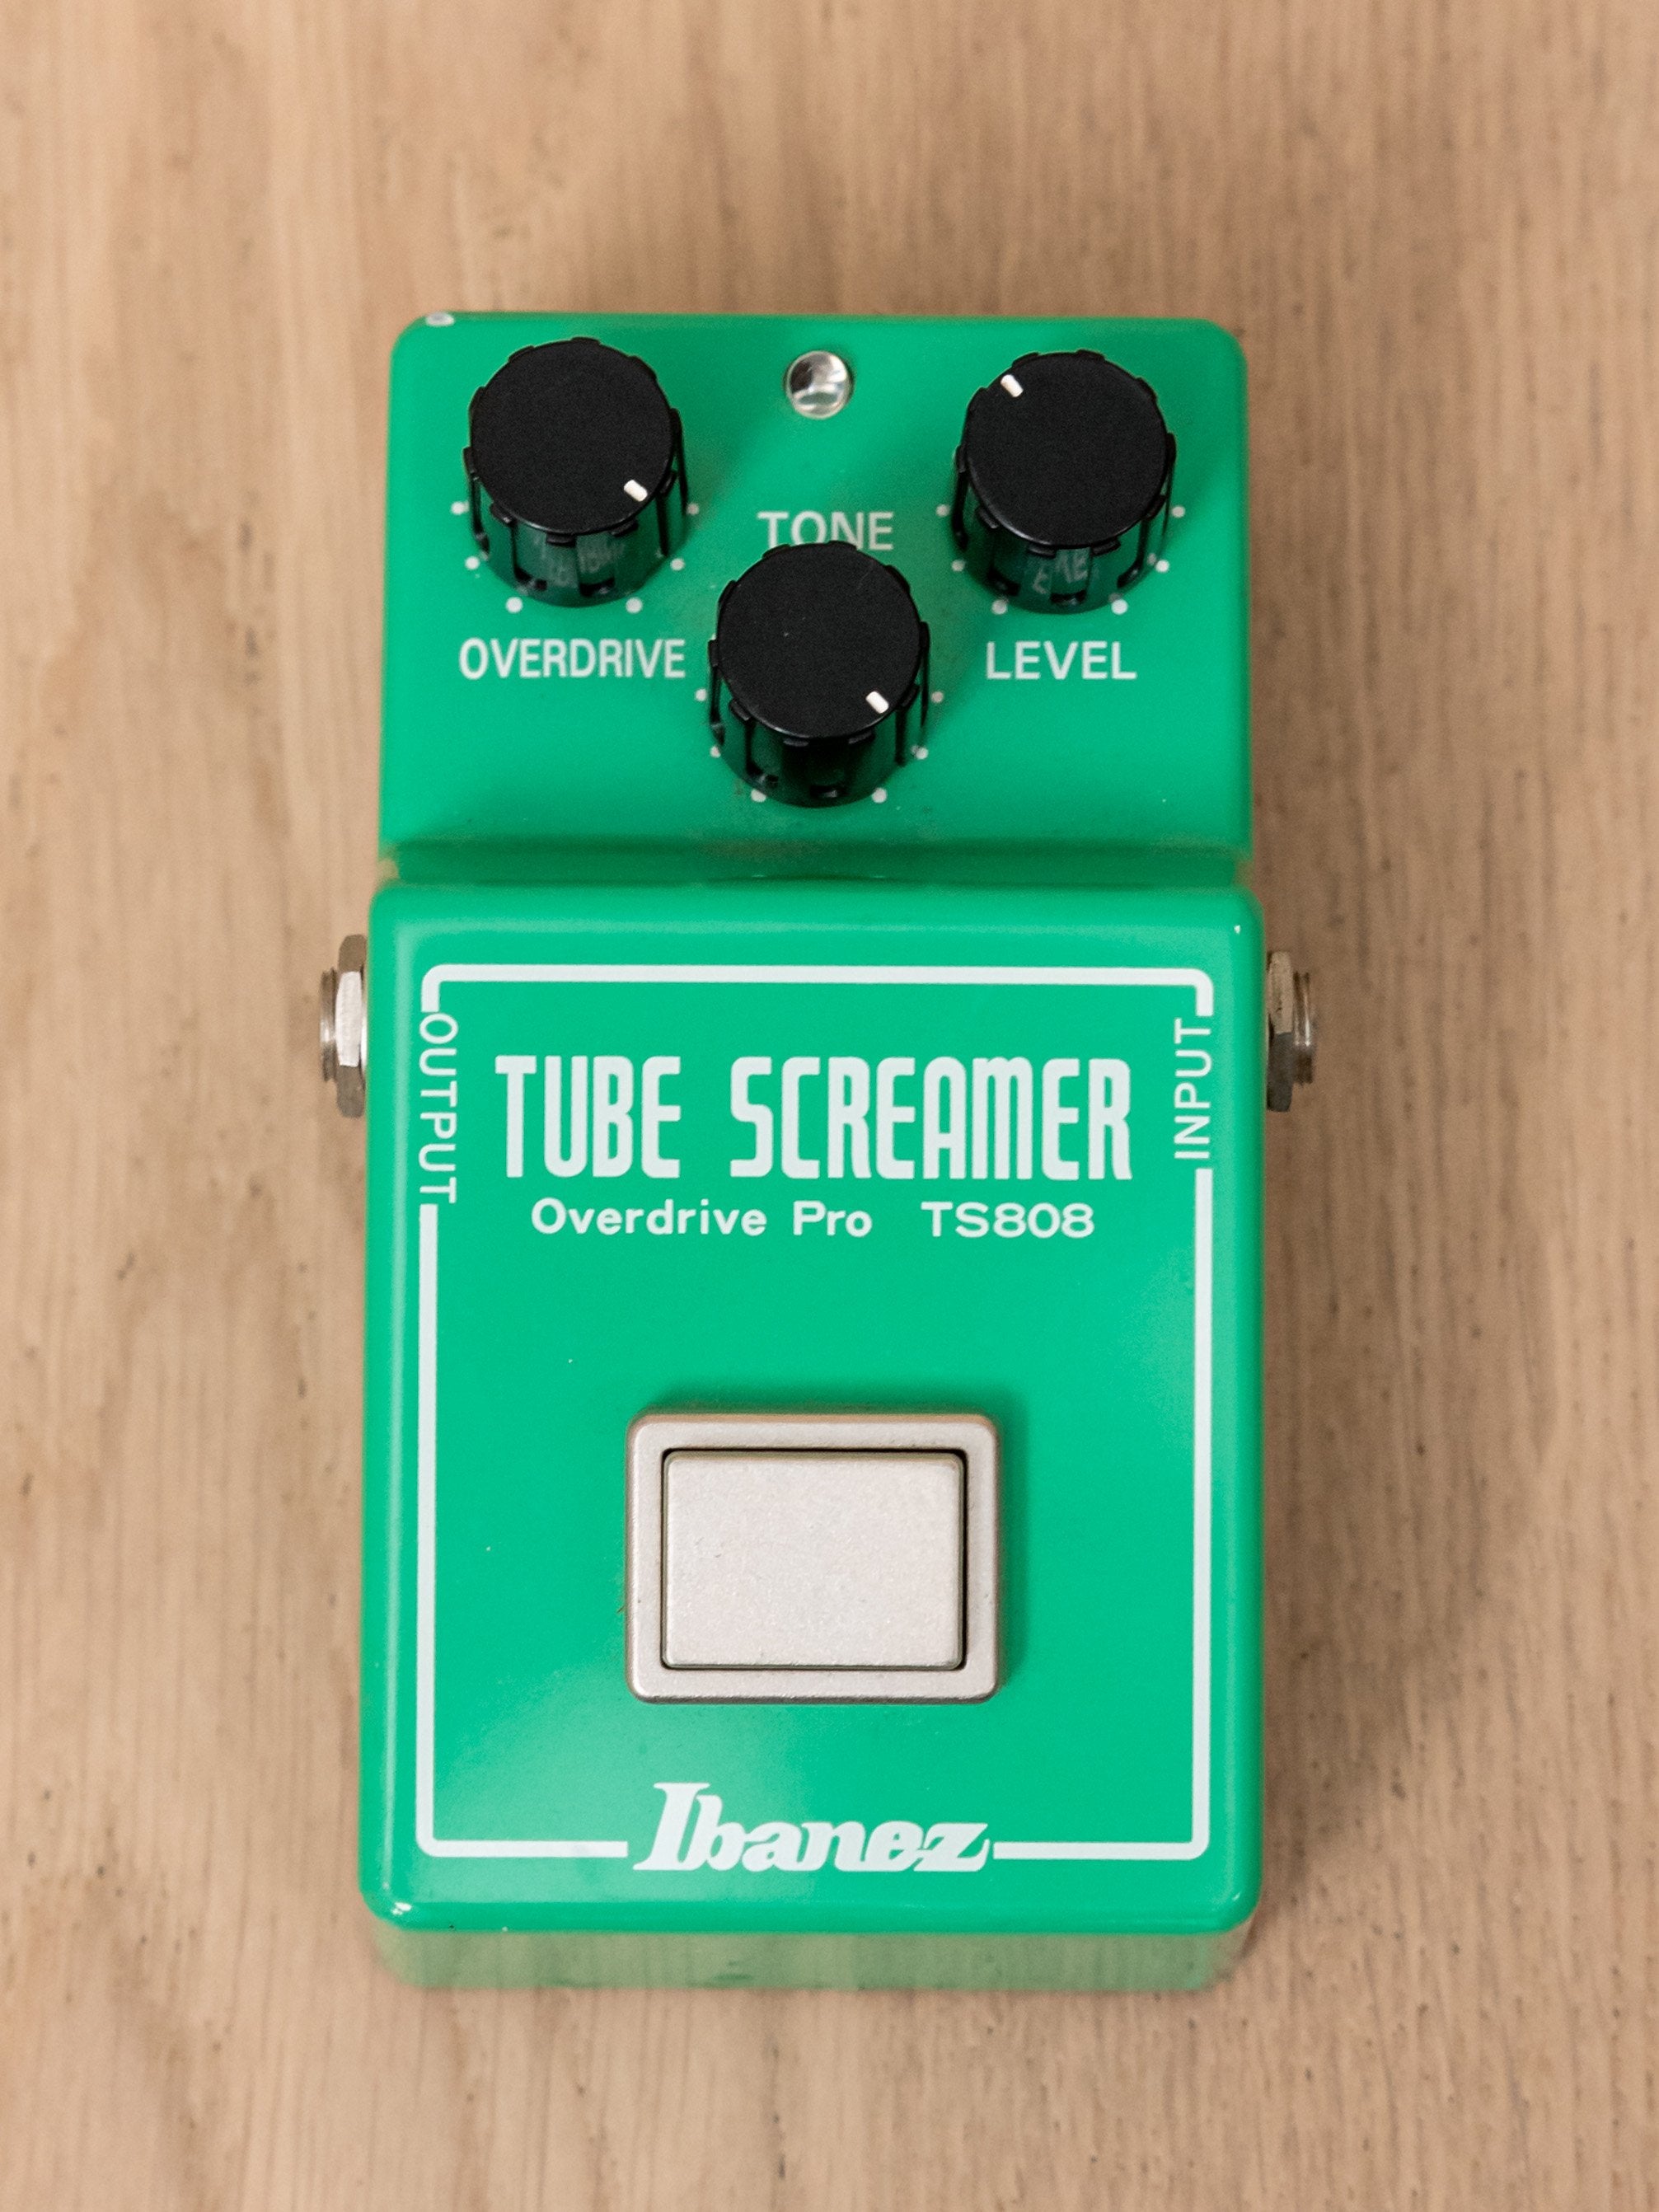 Ibanez Tube Screamer TS-808 Overdrive Pro Reissue Guitar Effects Pedal w/ Box